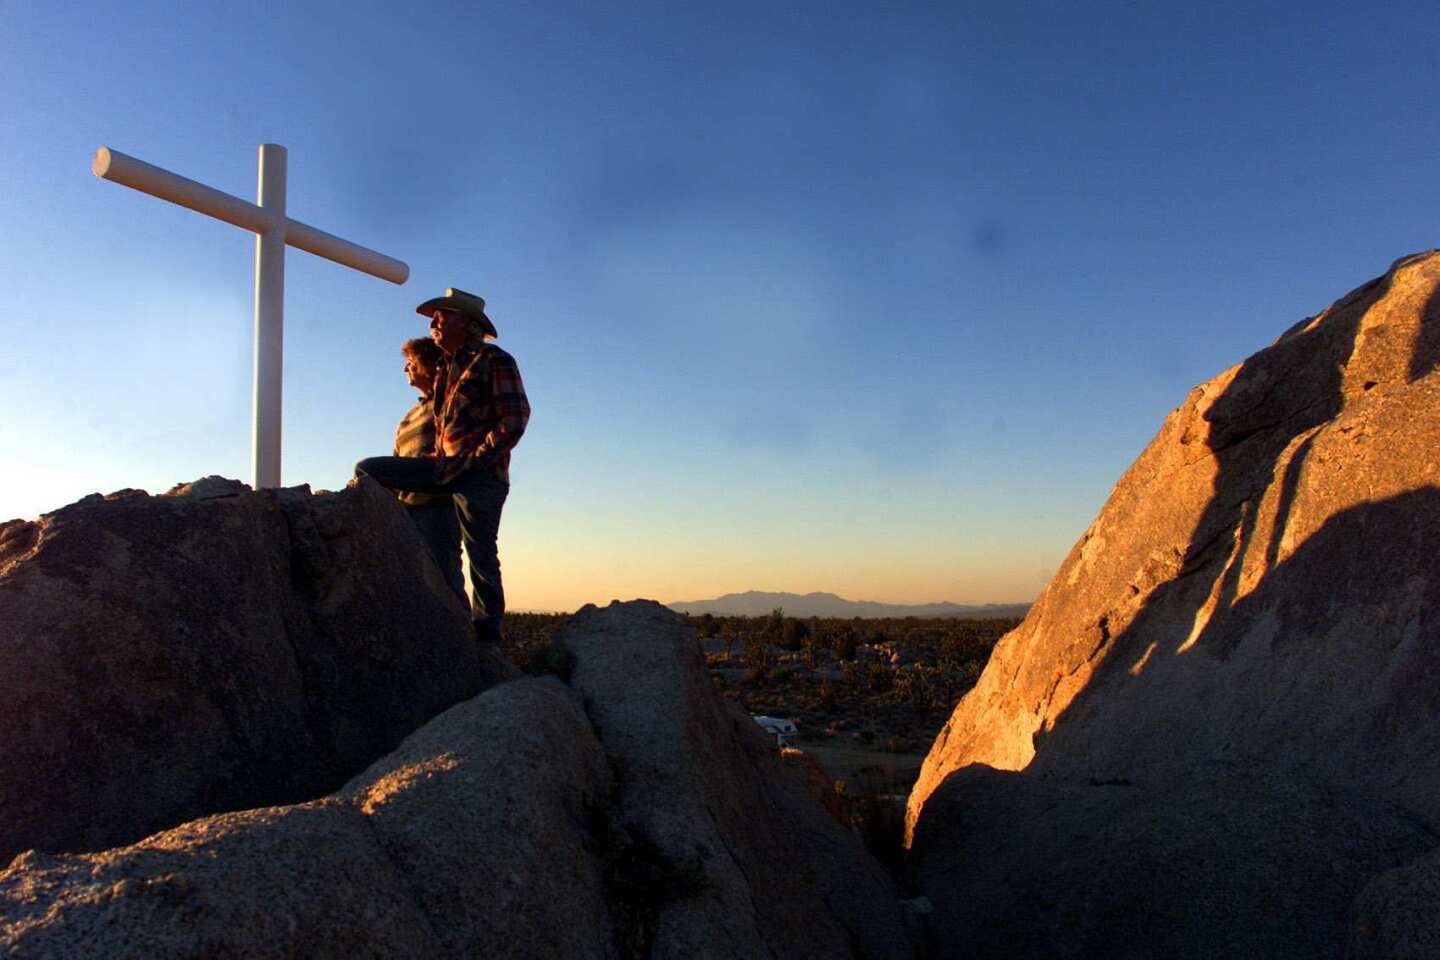 Henry and Wanda Sandoz at the cross on Sunset Rock in the Mojave National Preserve. The cross, erected in 1934 as a tribute to World War I veterans, was stolen, but the Sandozes plan to raise a new one on the site.